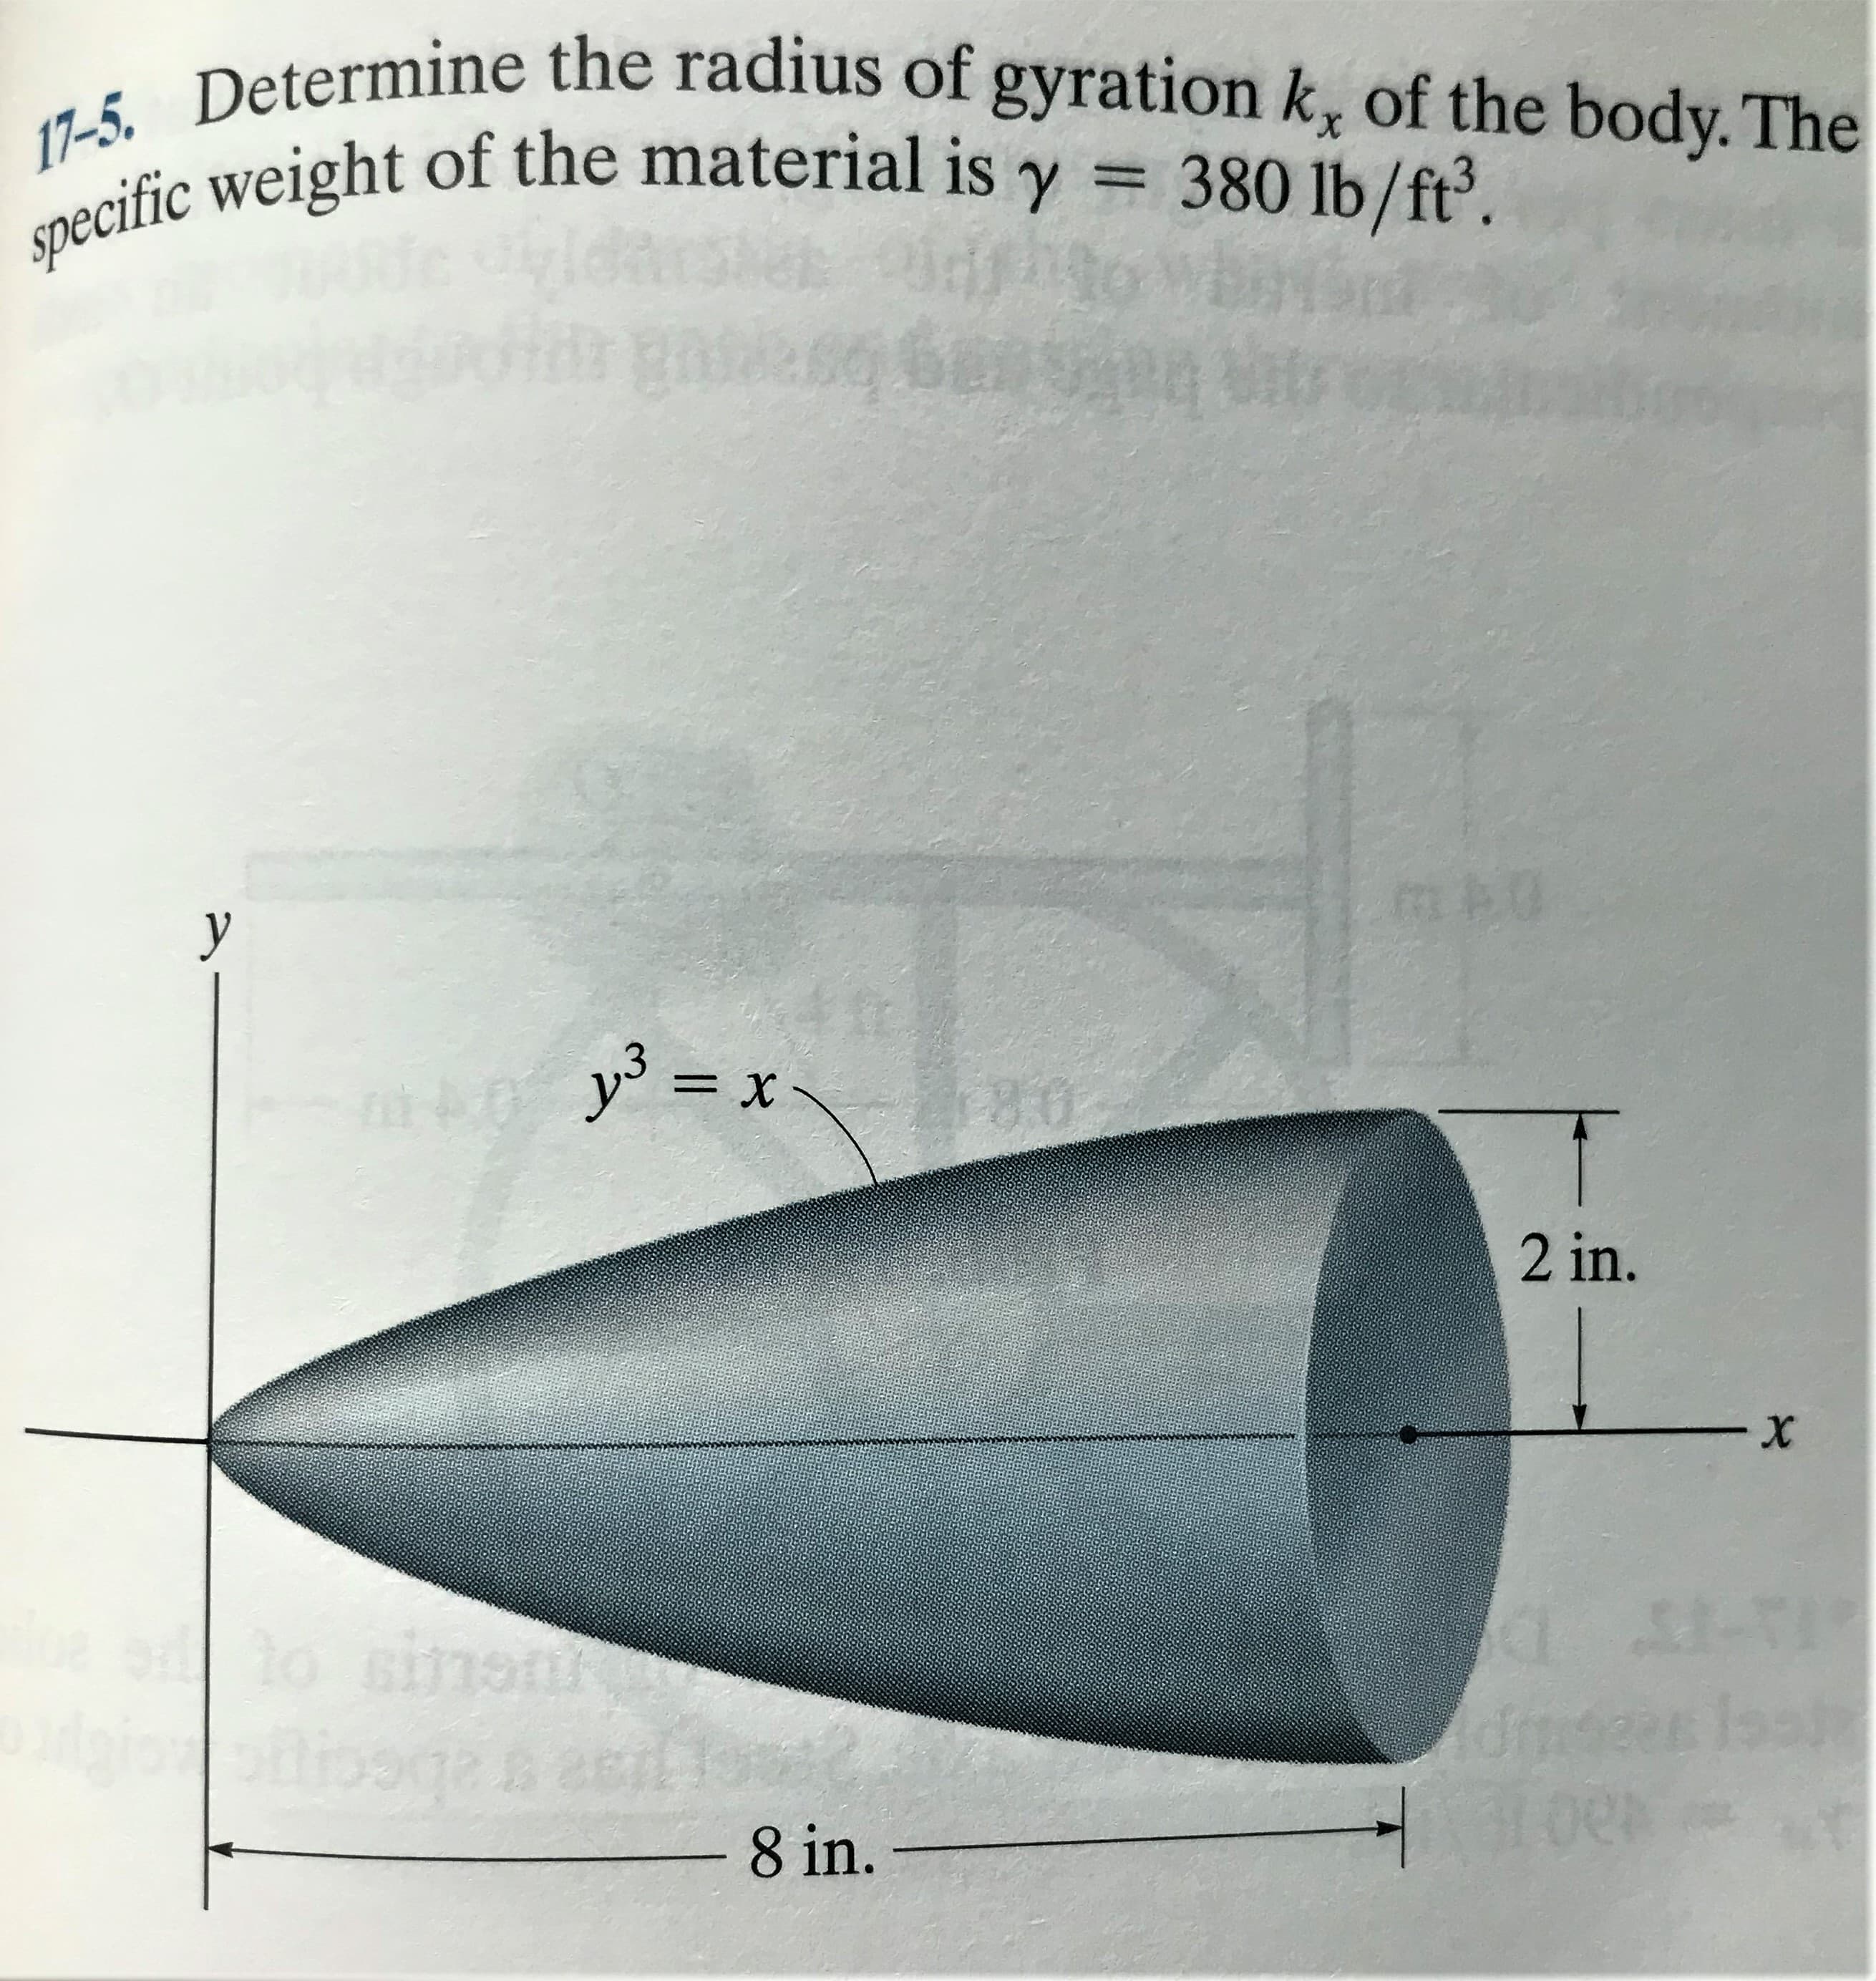 17-5. Determine the radius of gyration k, of the body. The
specific weight of the material is
%3D
y° = x
%3D
2 in.
to
sinst
ta2 abecip
8 in.
